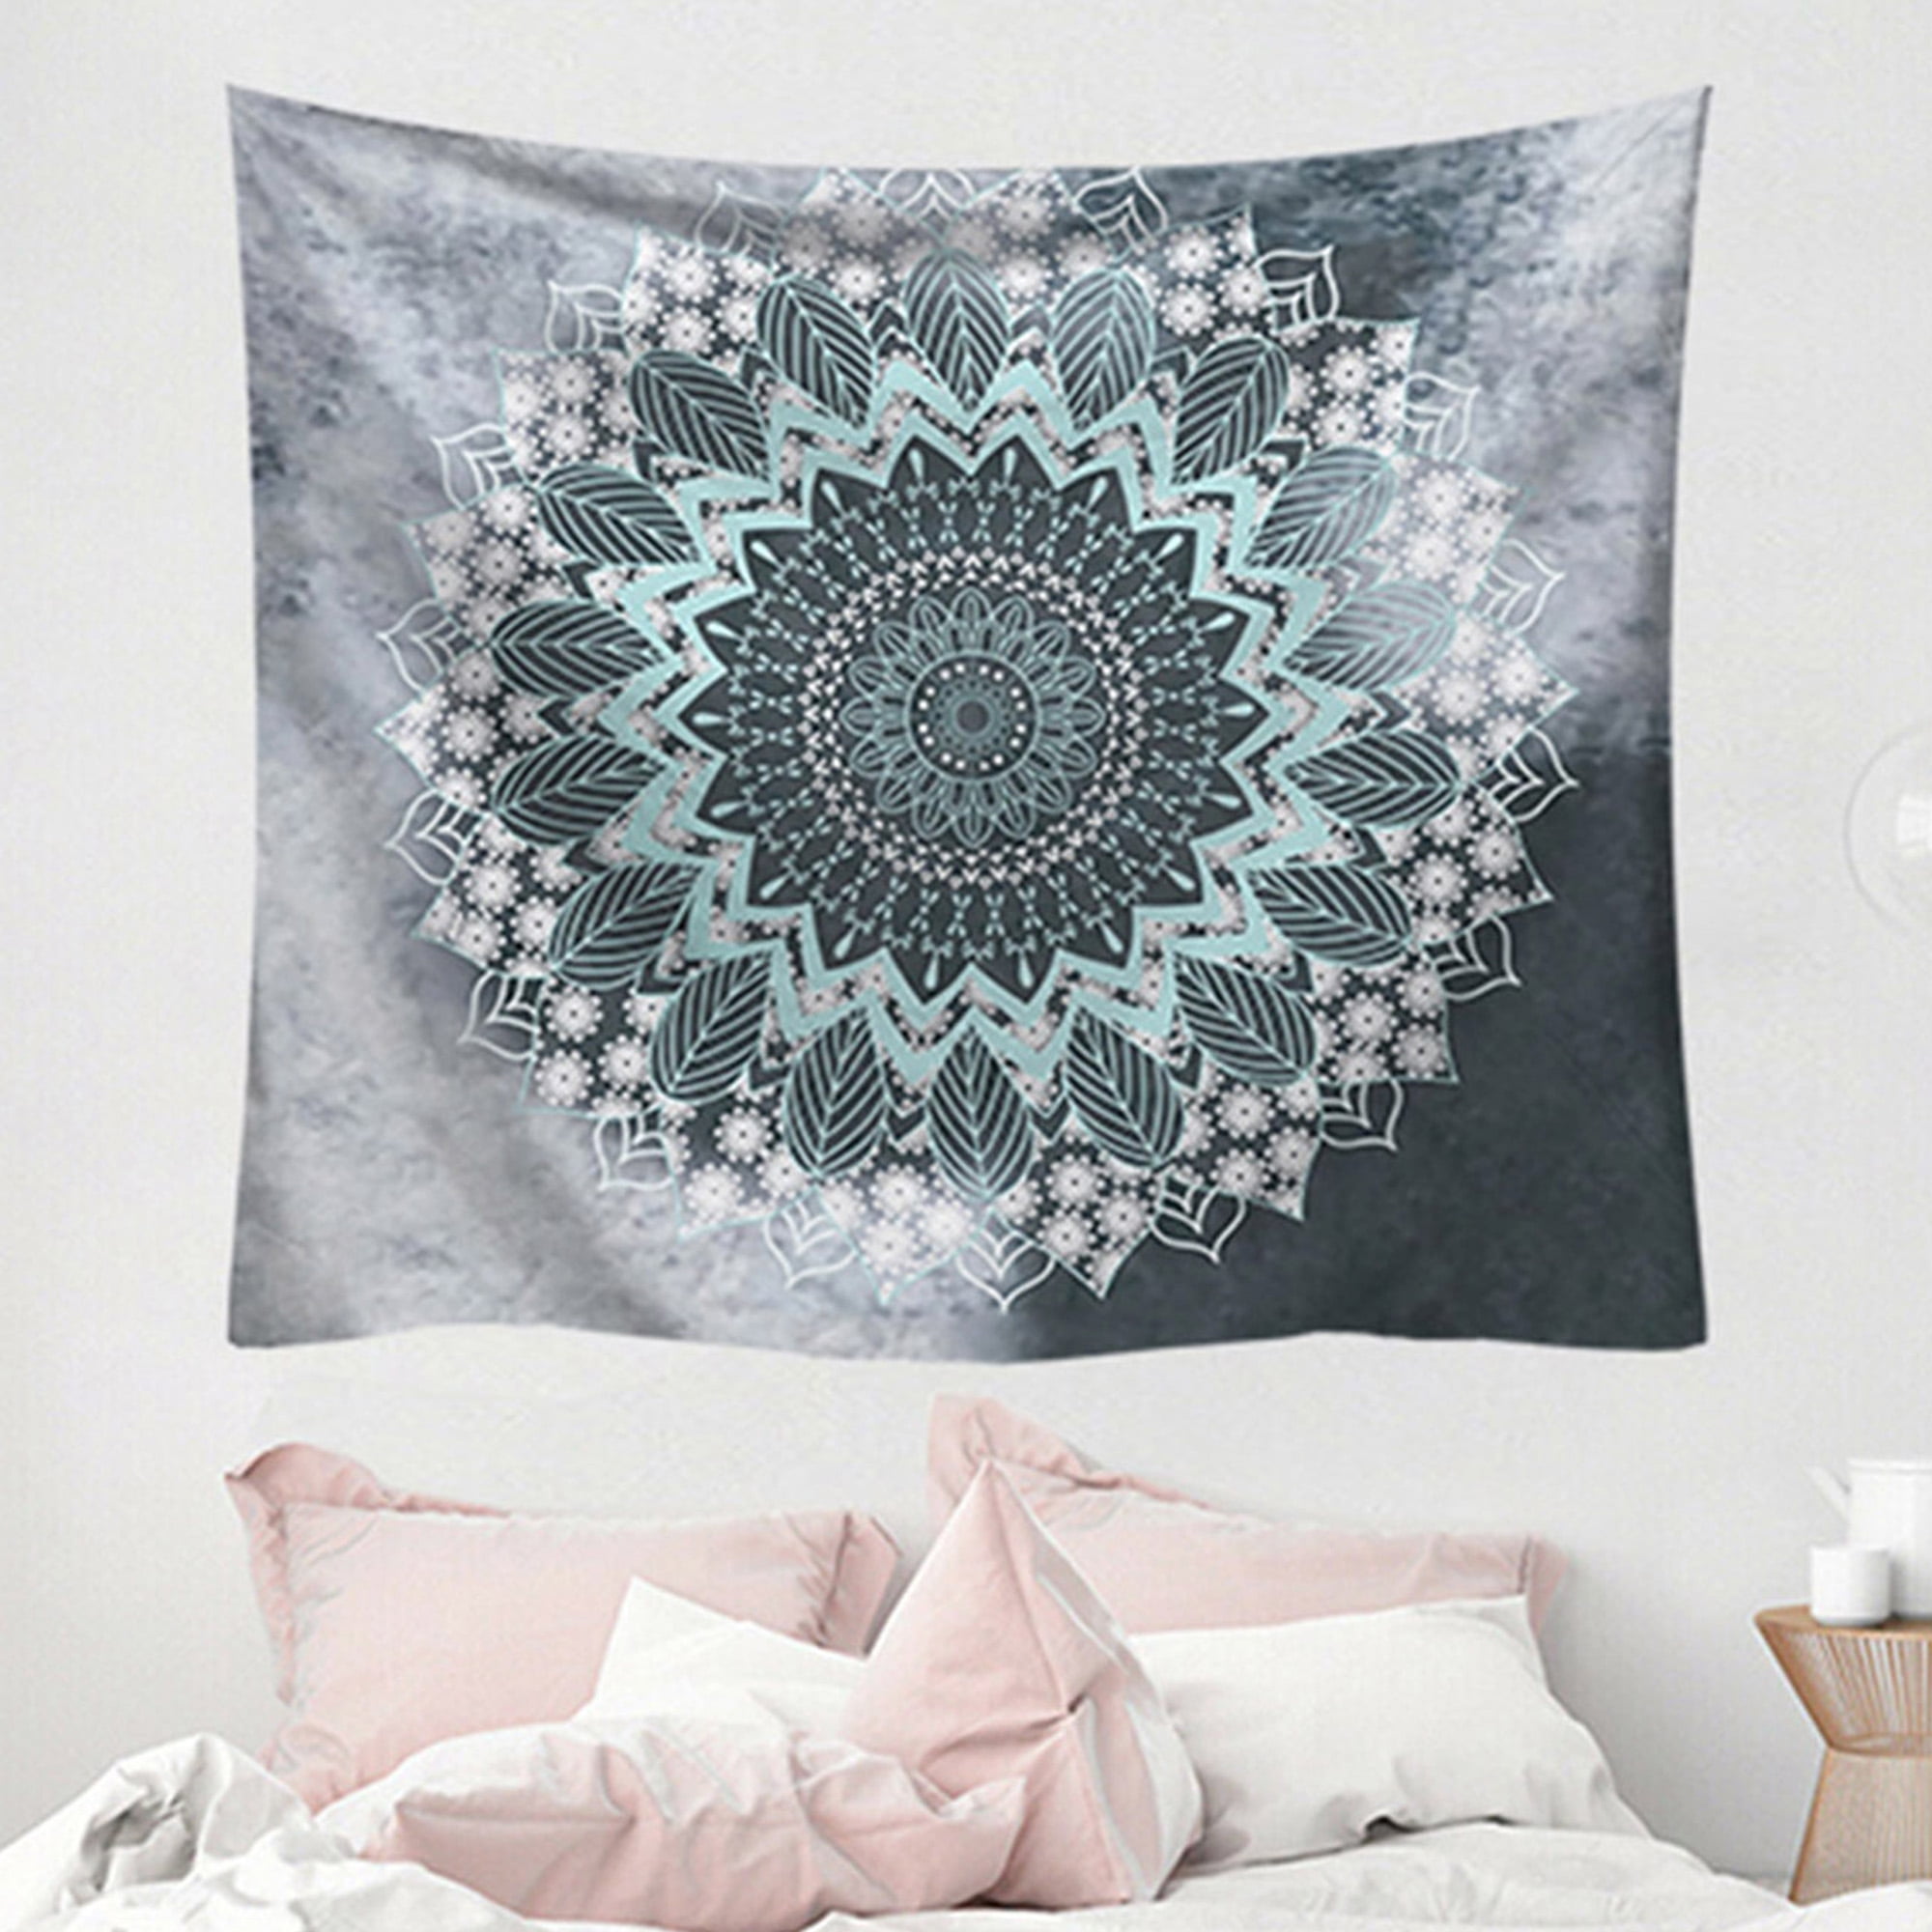 Mandala Flower Tapestry Hippie Bedspread Wall Hanging Tapestries Home Decor 